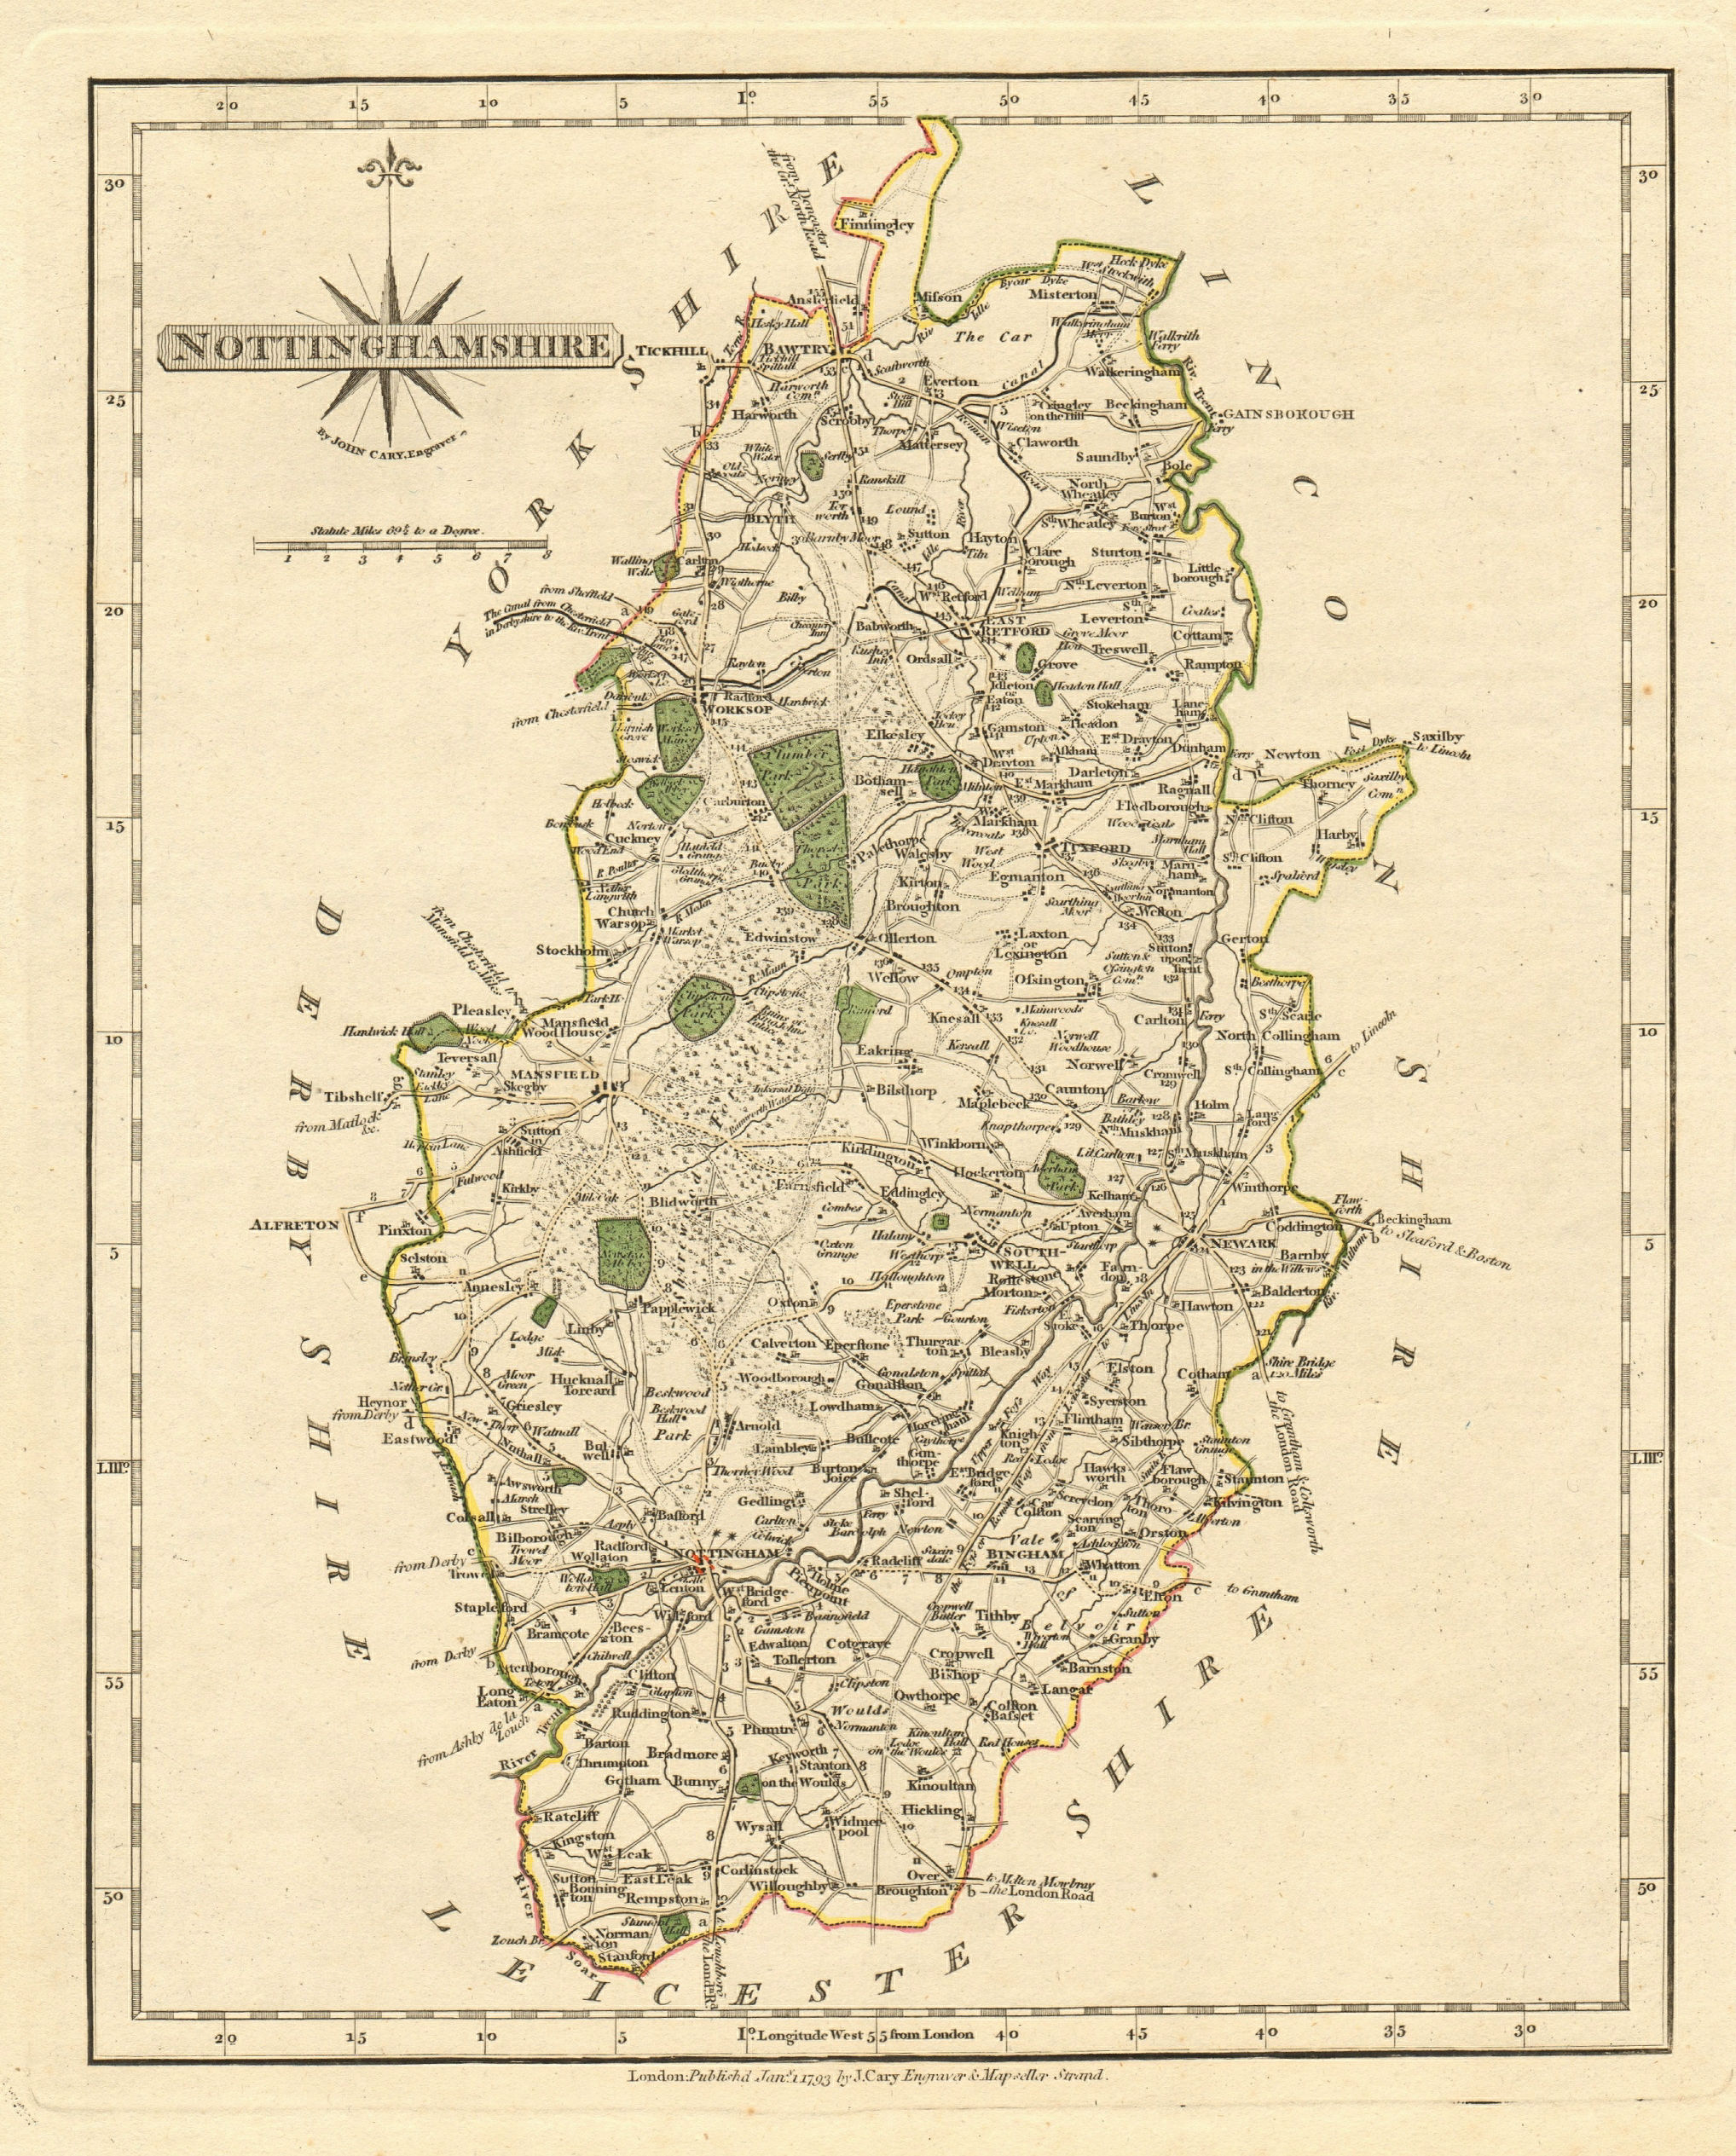 Associate Product Antique county map of NOTTINGHAMSHIRE by JOHN CARY. Original outline colour 1793